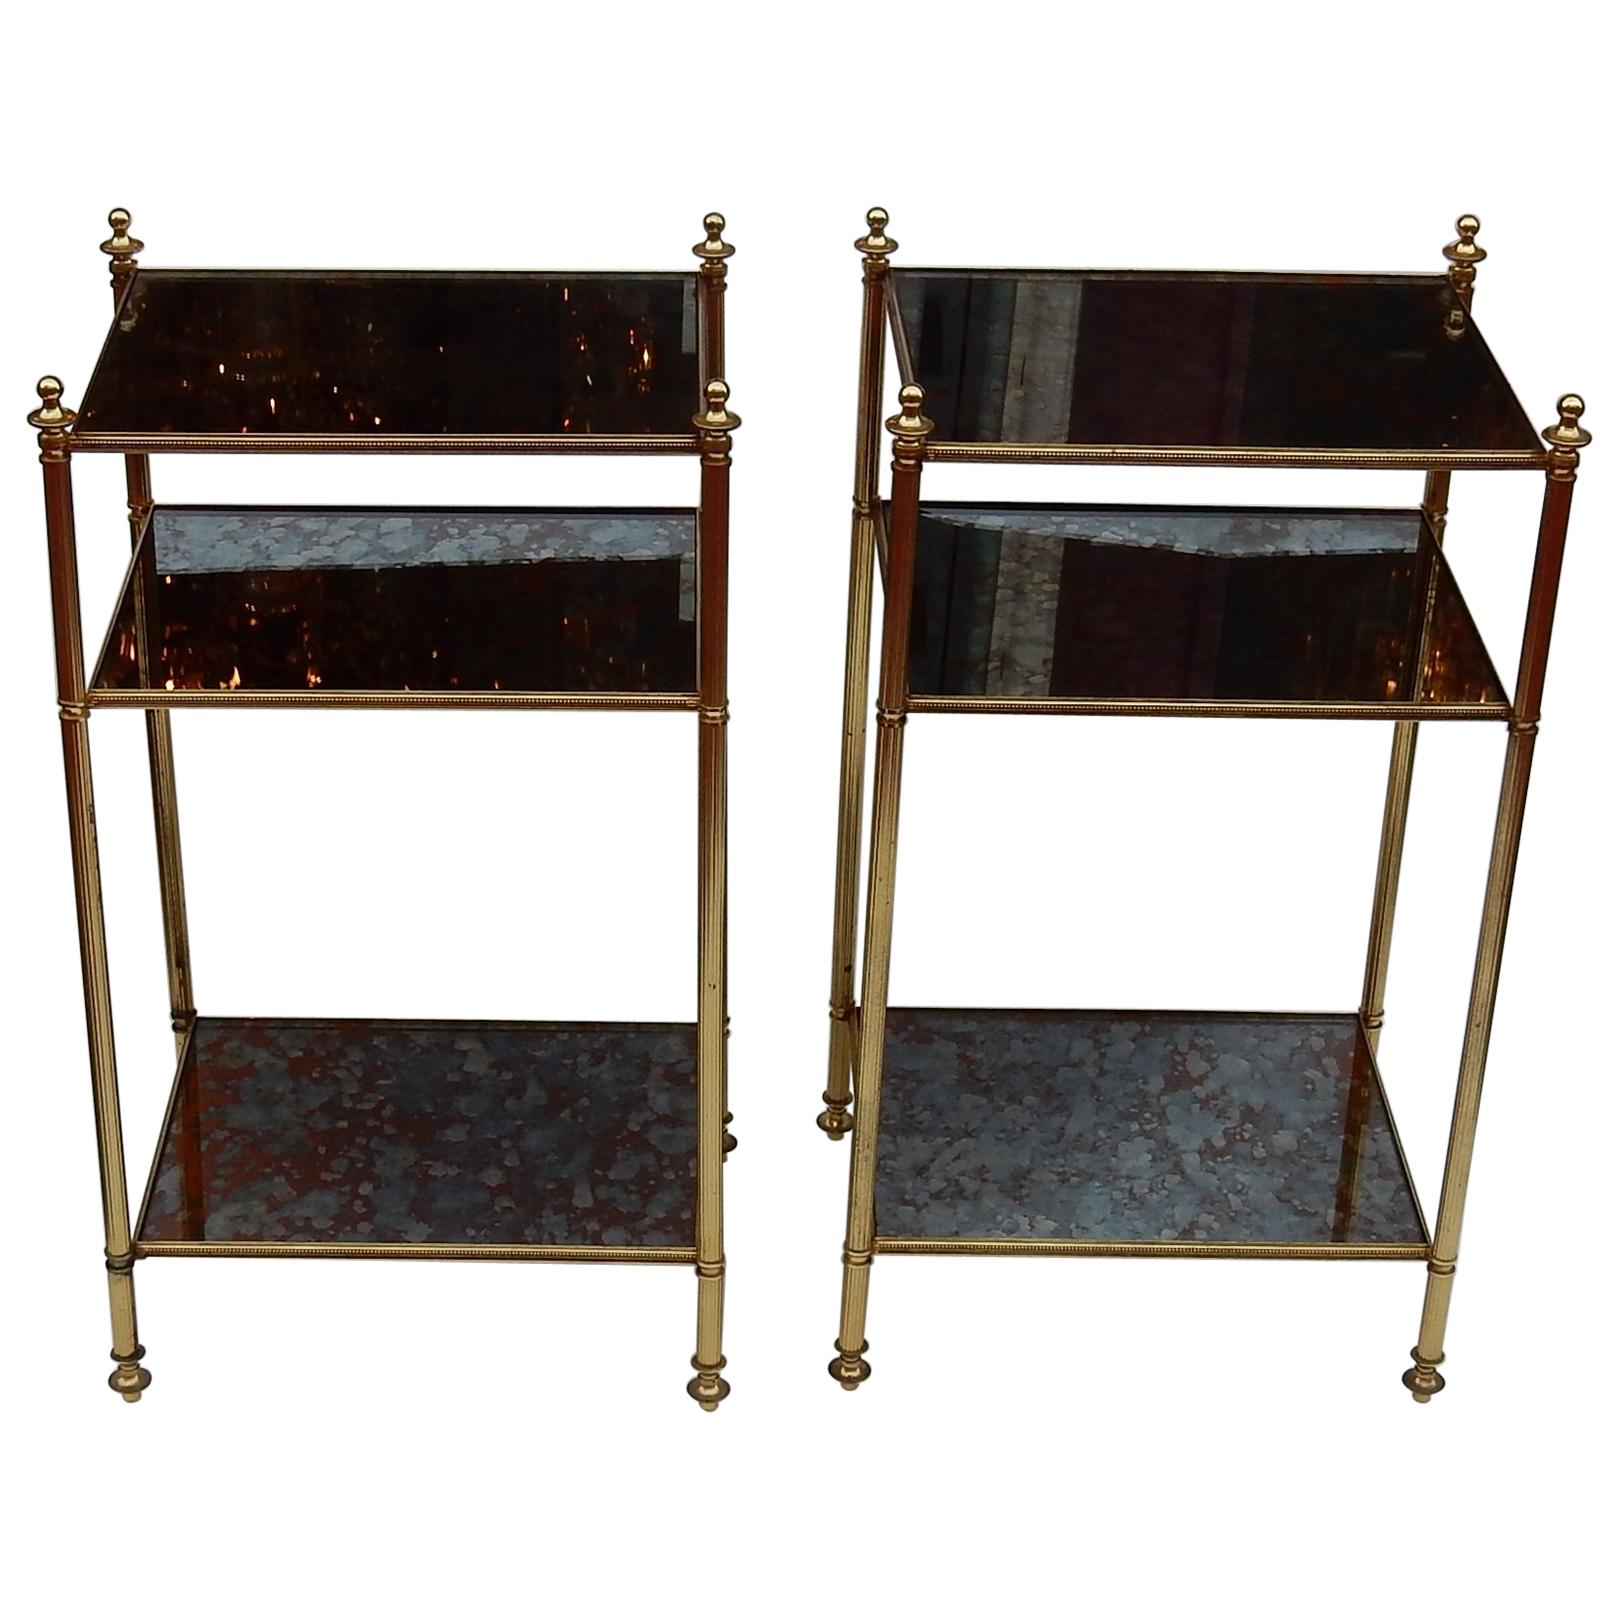 1950-1970 Pair of Shelves Has 3 Levels Style of Maison Bagués with Olded Mirror